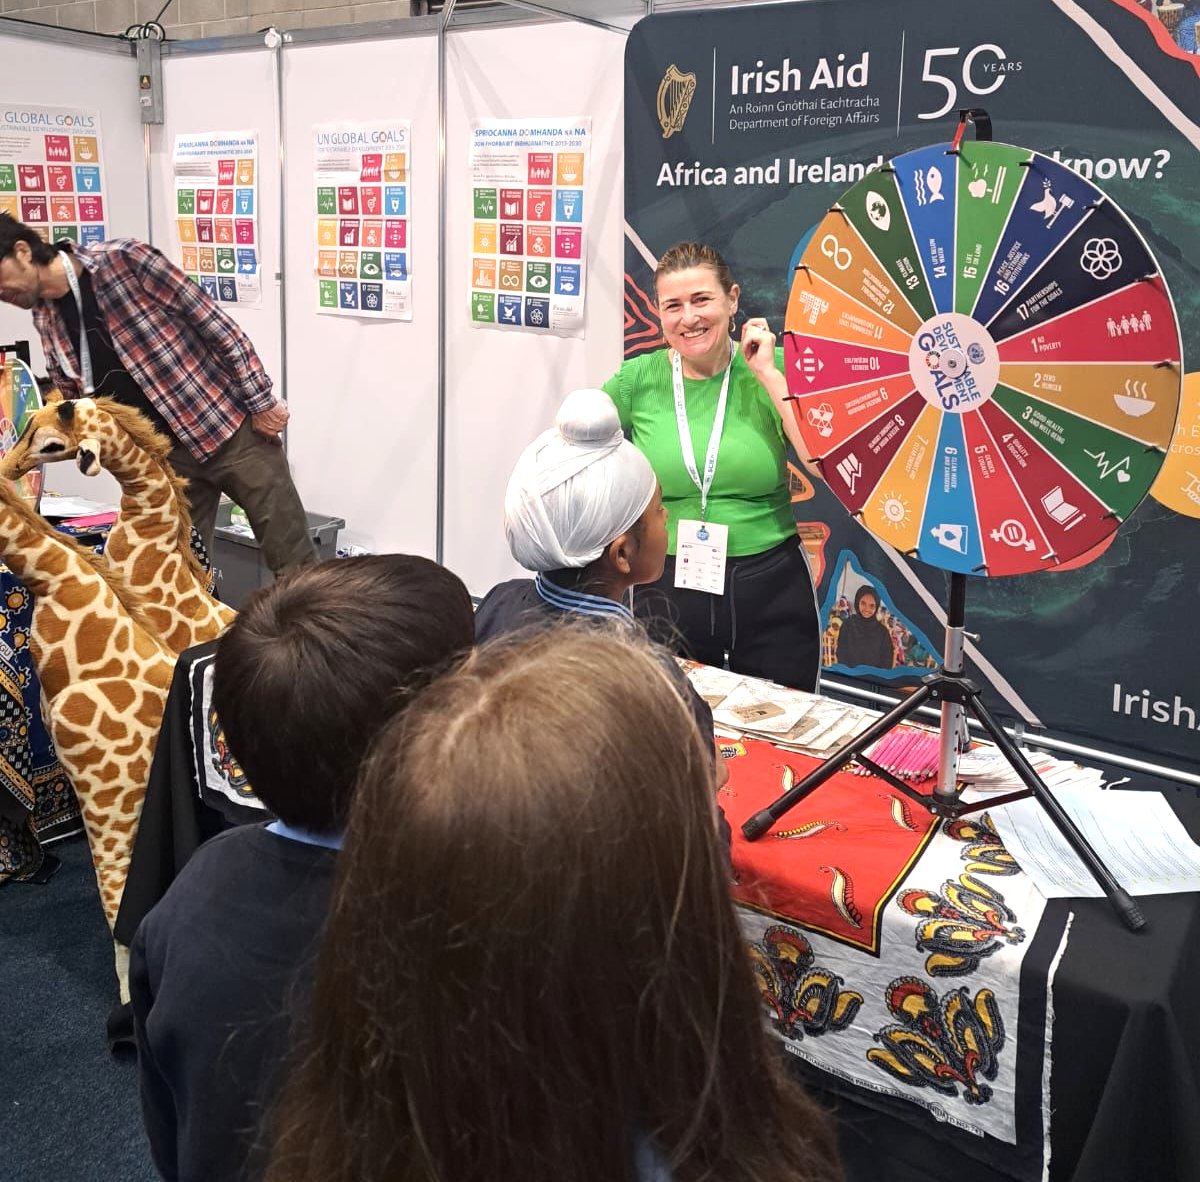 We're @esbscienceblast in Limerick this week from 21st to 23rd May to meet primary schools. It's a fantastic opportunity for primary school students to exhibit their science projects and take part in workshops, interactive games and lots of activities. #SDGs #IrishAid